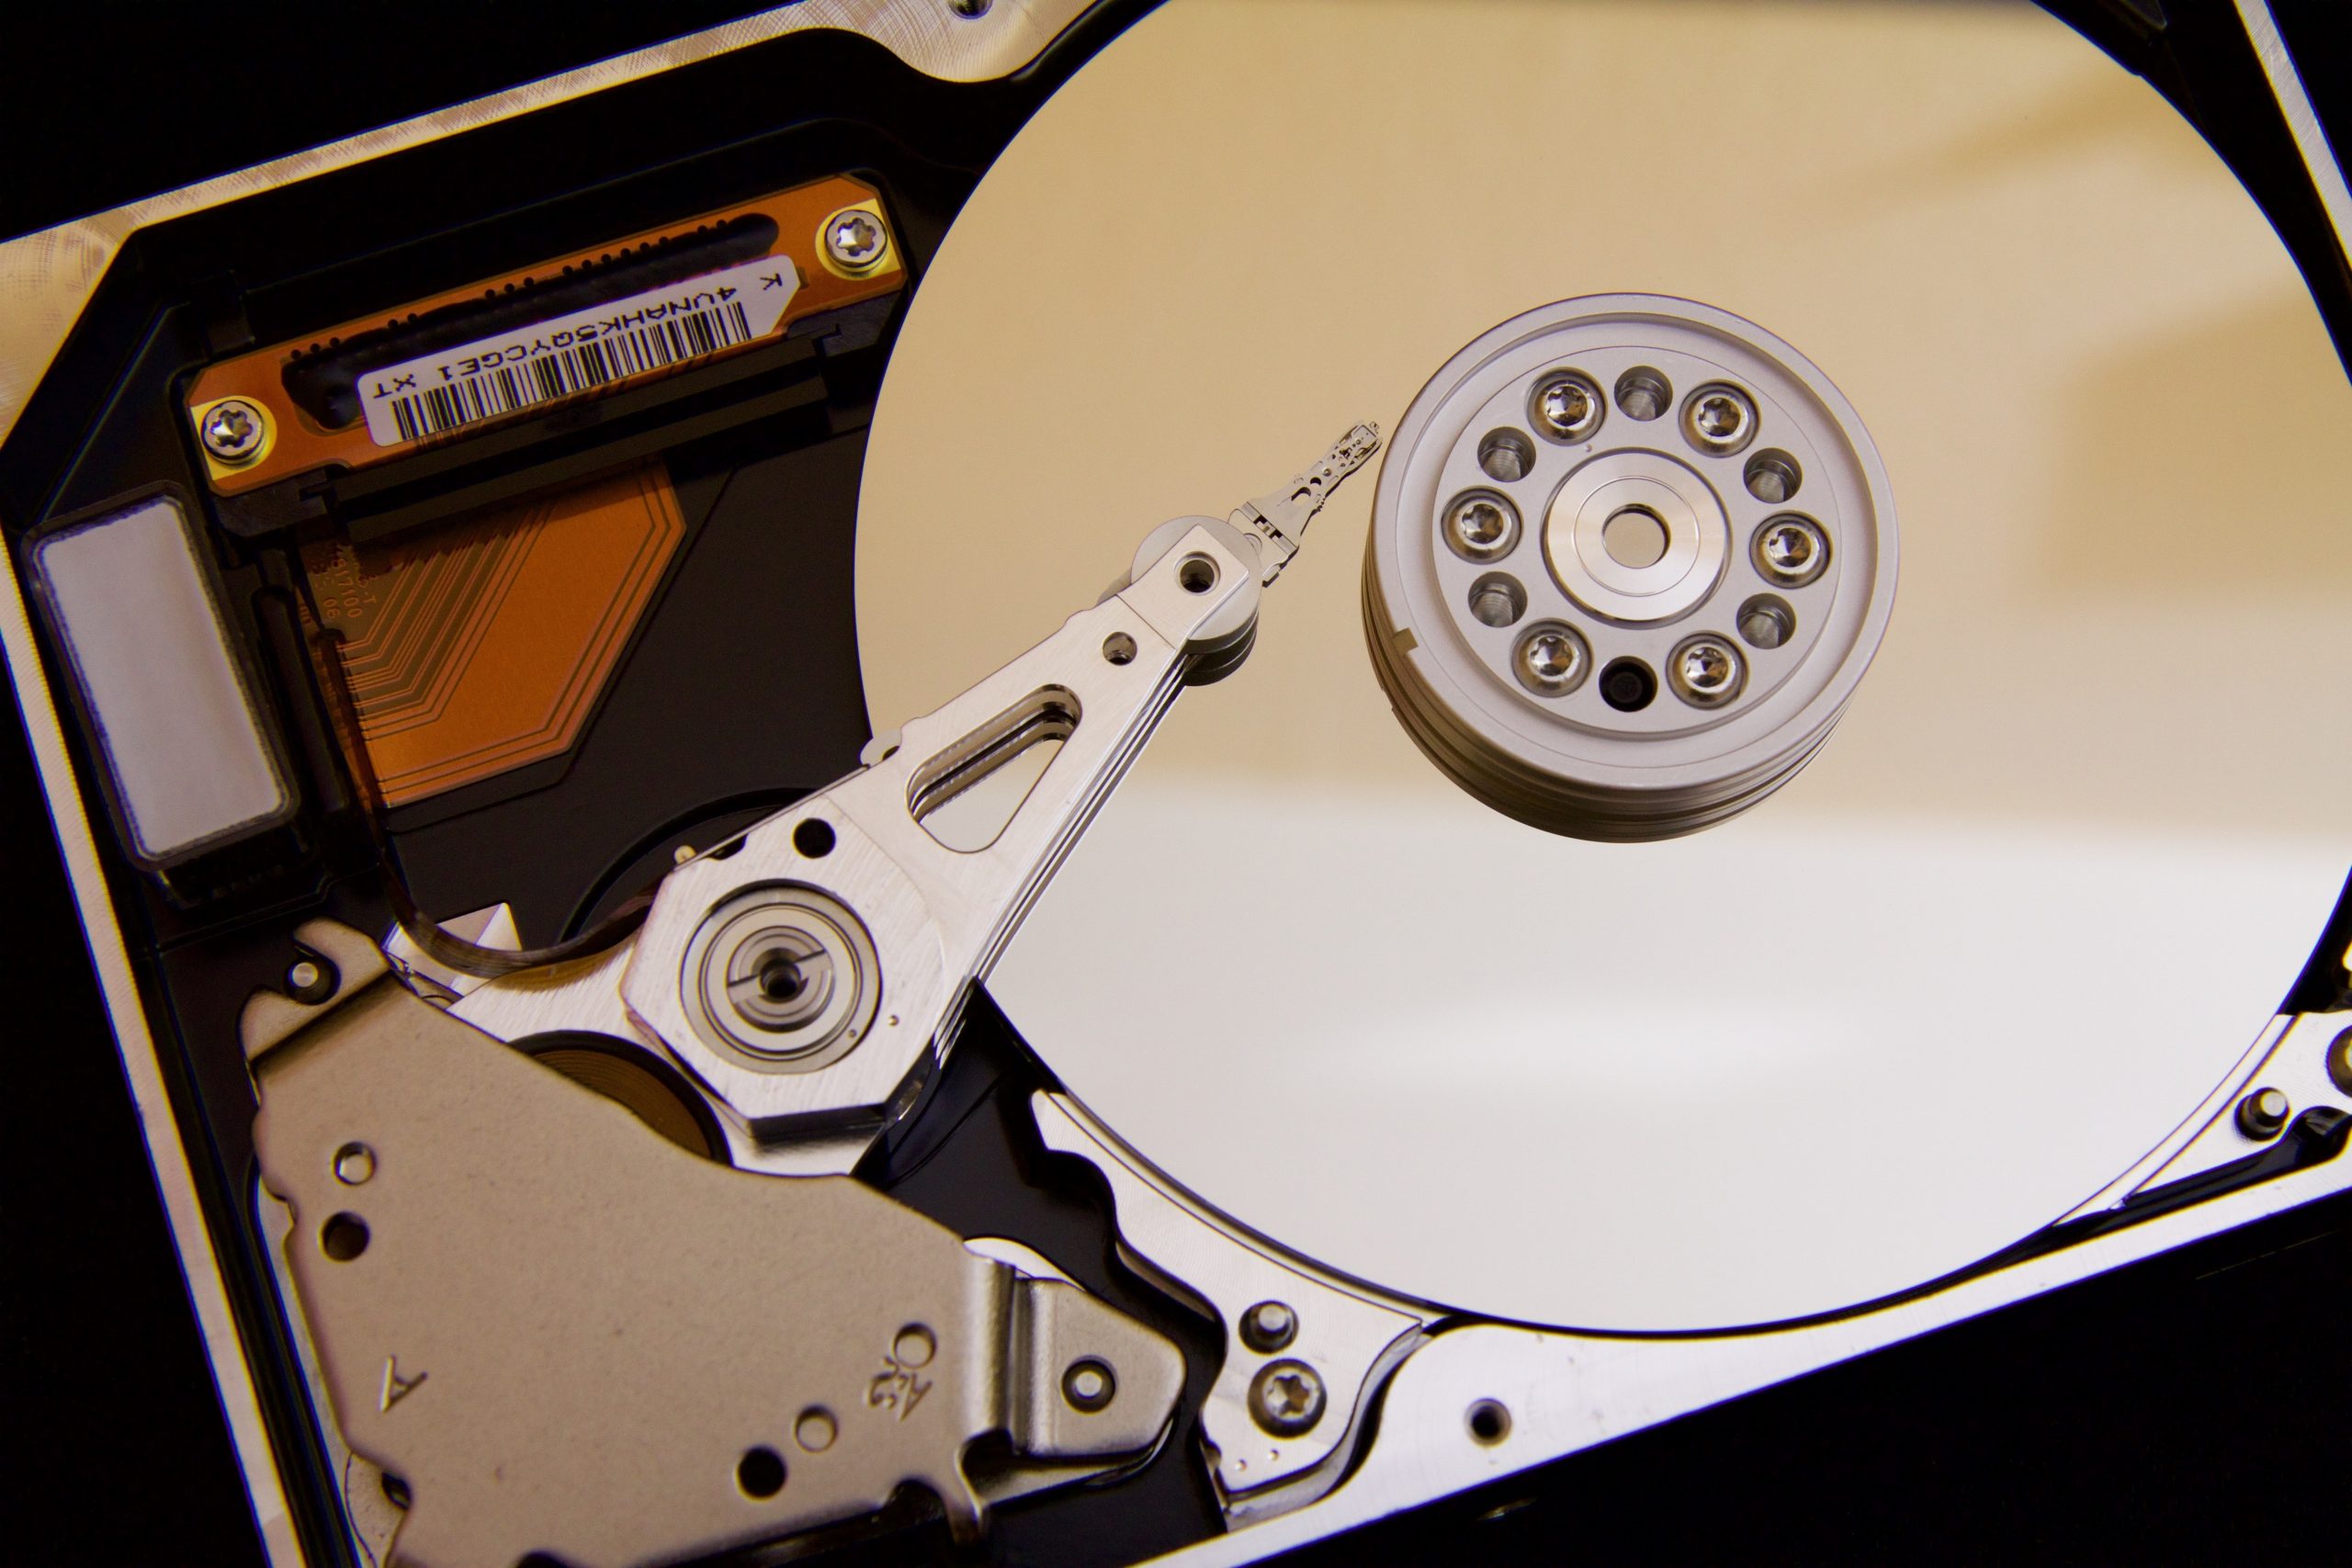 How to Fix Corrupted Hard Drive&Recover Data On a Mac